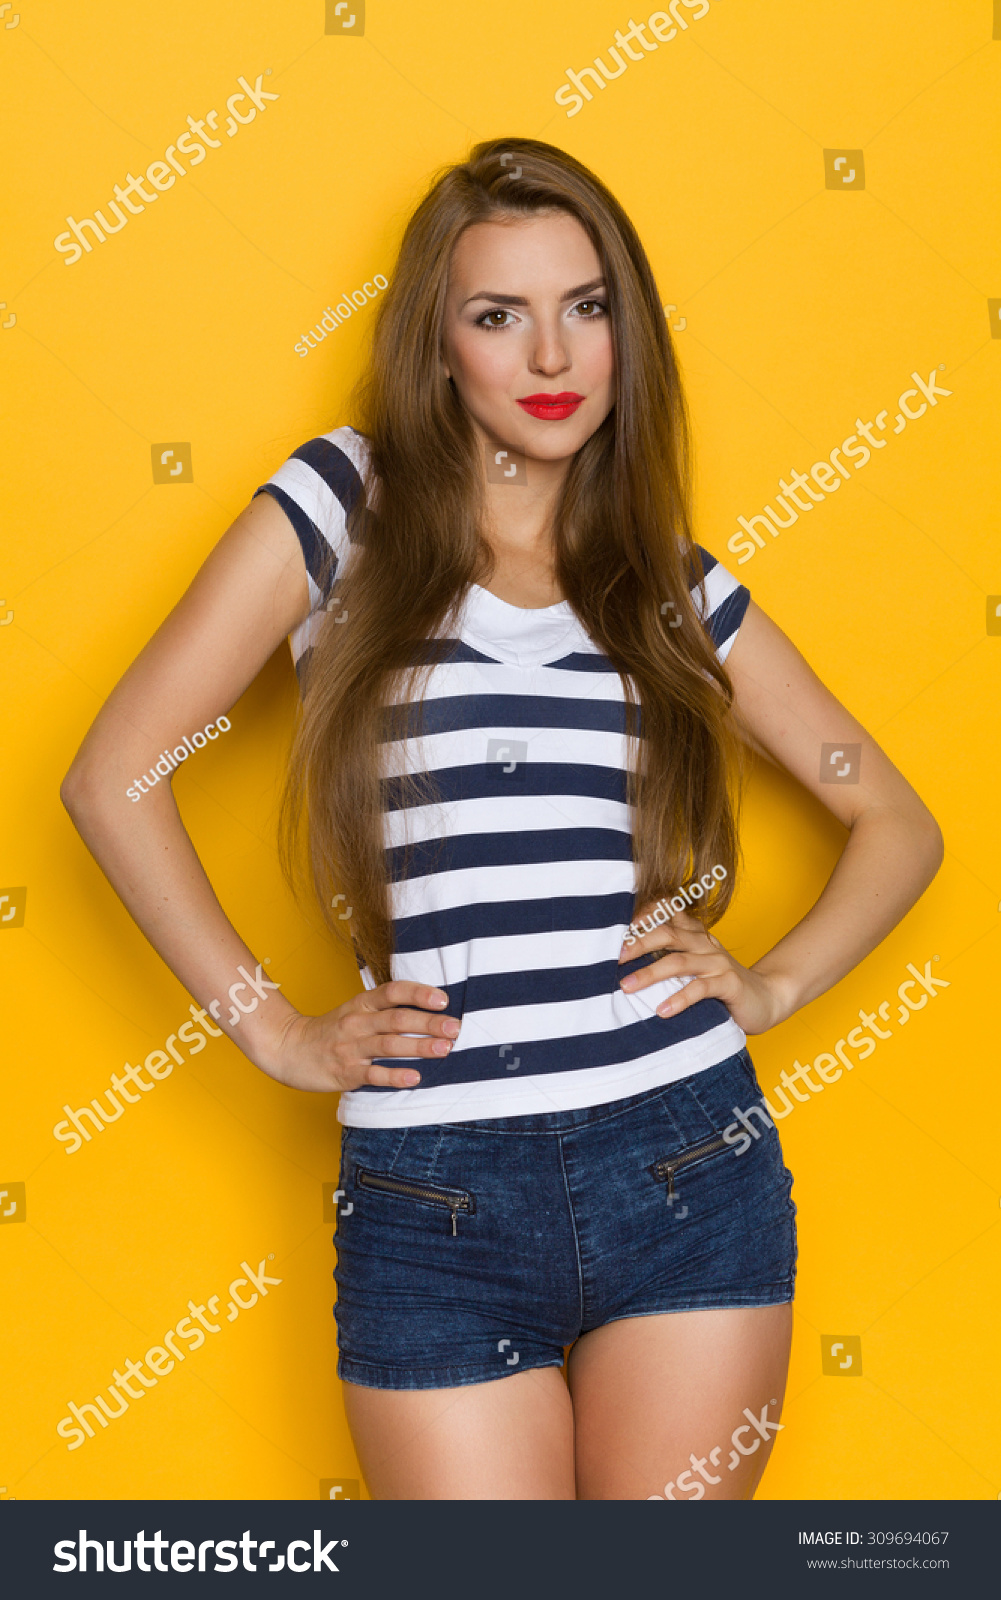 Cheerful Girl In Striped Shirt. Beautiful Young Woman Posing With Hands ...